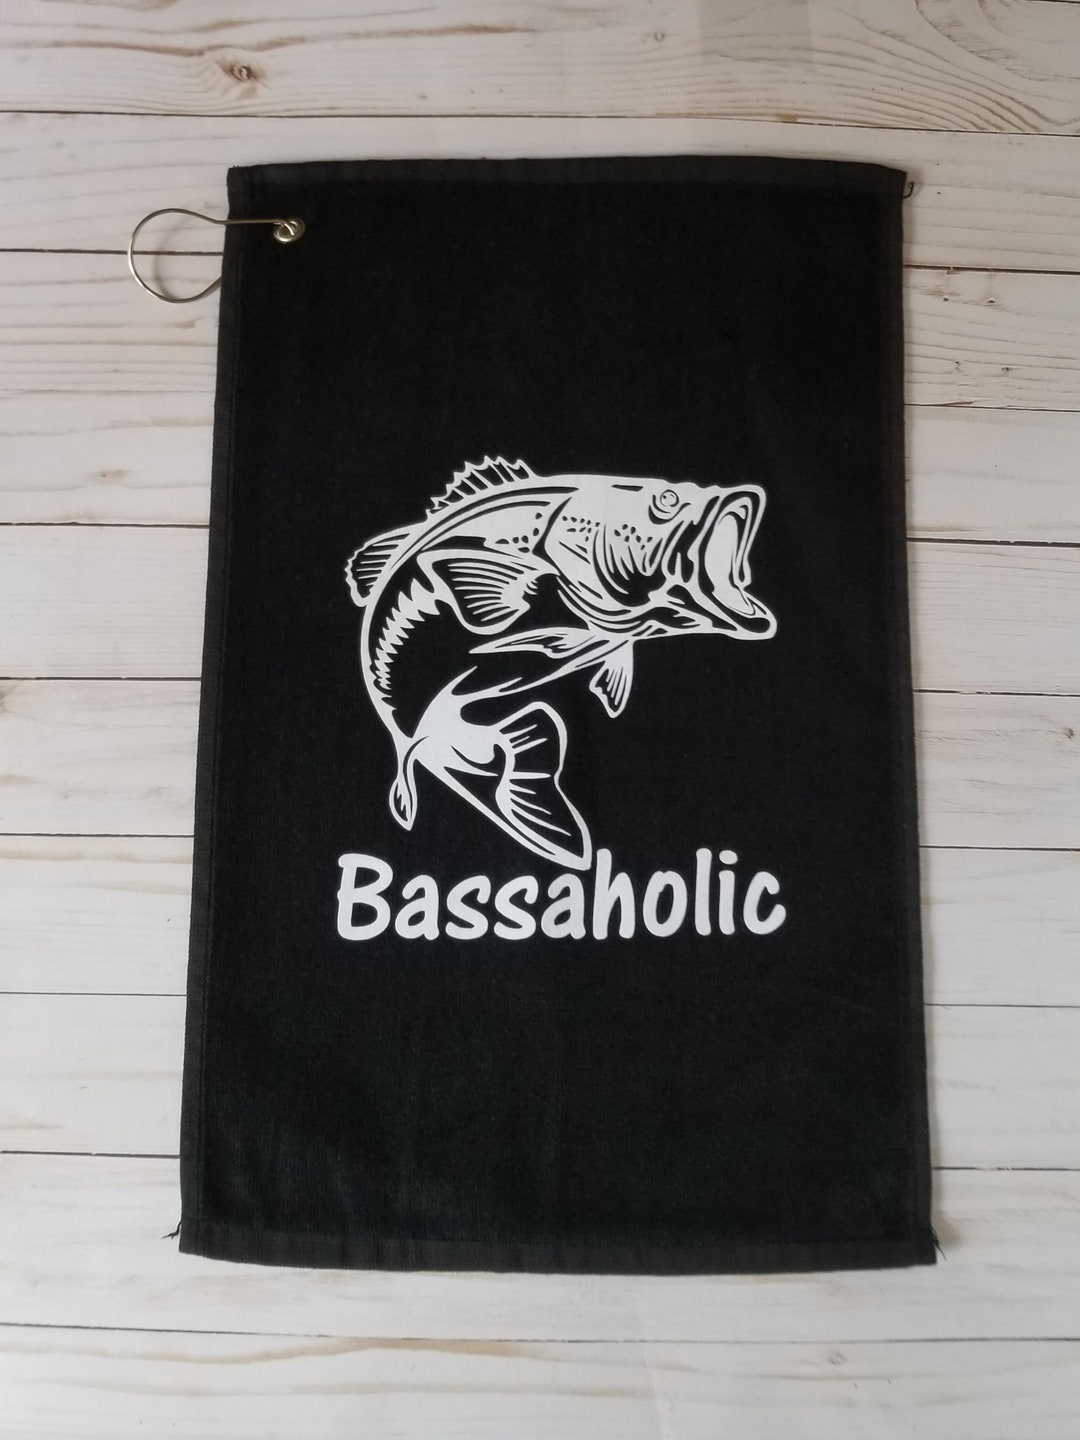 Bass Fishing Towel, Cabin Towels, Fishing Boat Accessories, Bass Fishing  Gifts for Men, Fishing Gift for Dad, Lake House Towels, Golf Towel 